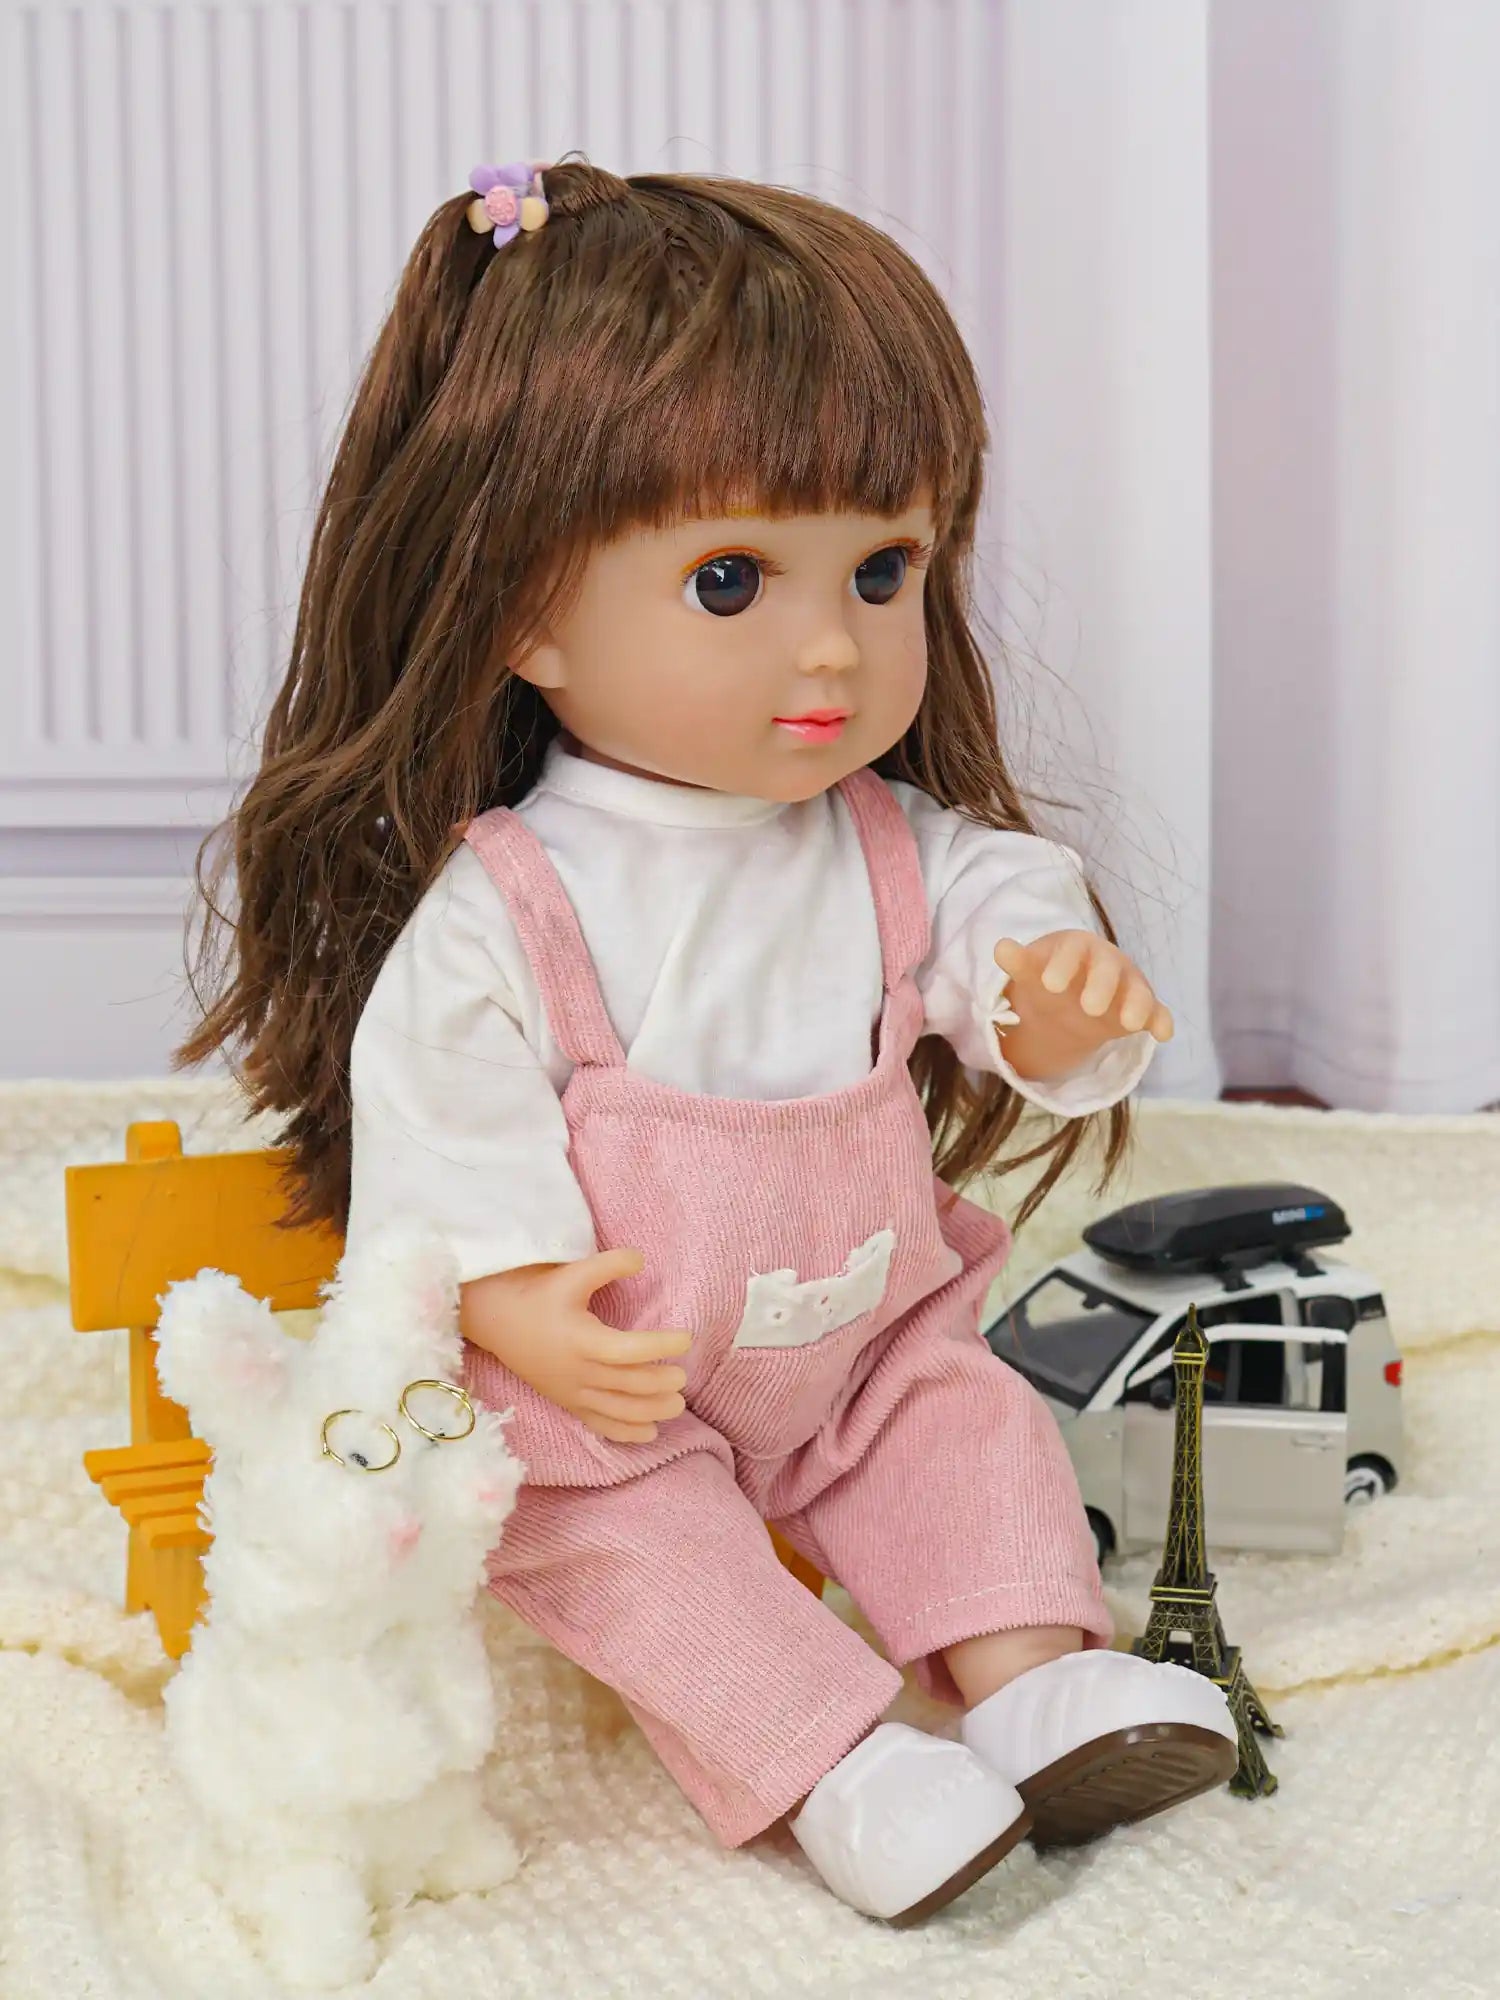 Doll seated on a chair with a white plush dog and toy Eiffel Tower.